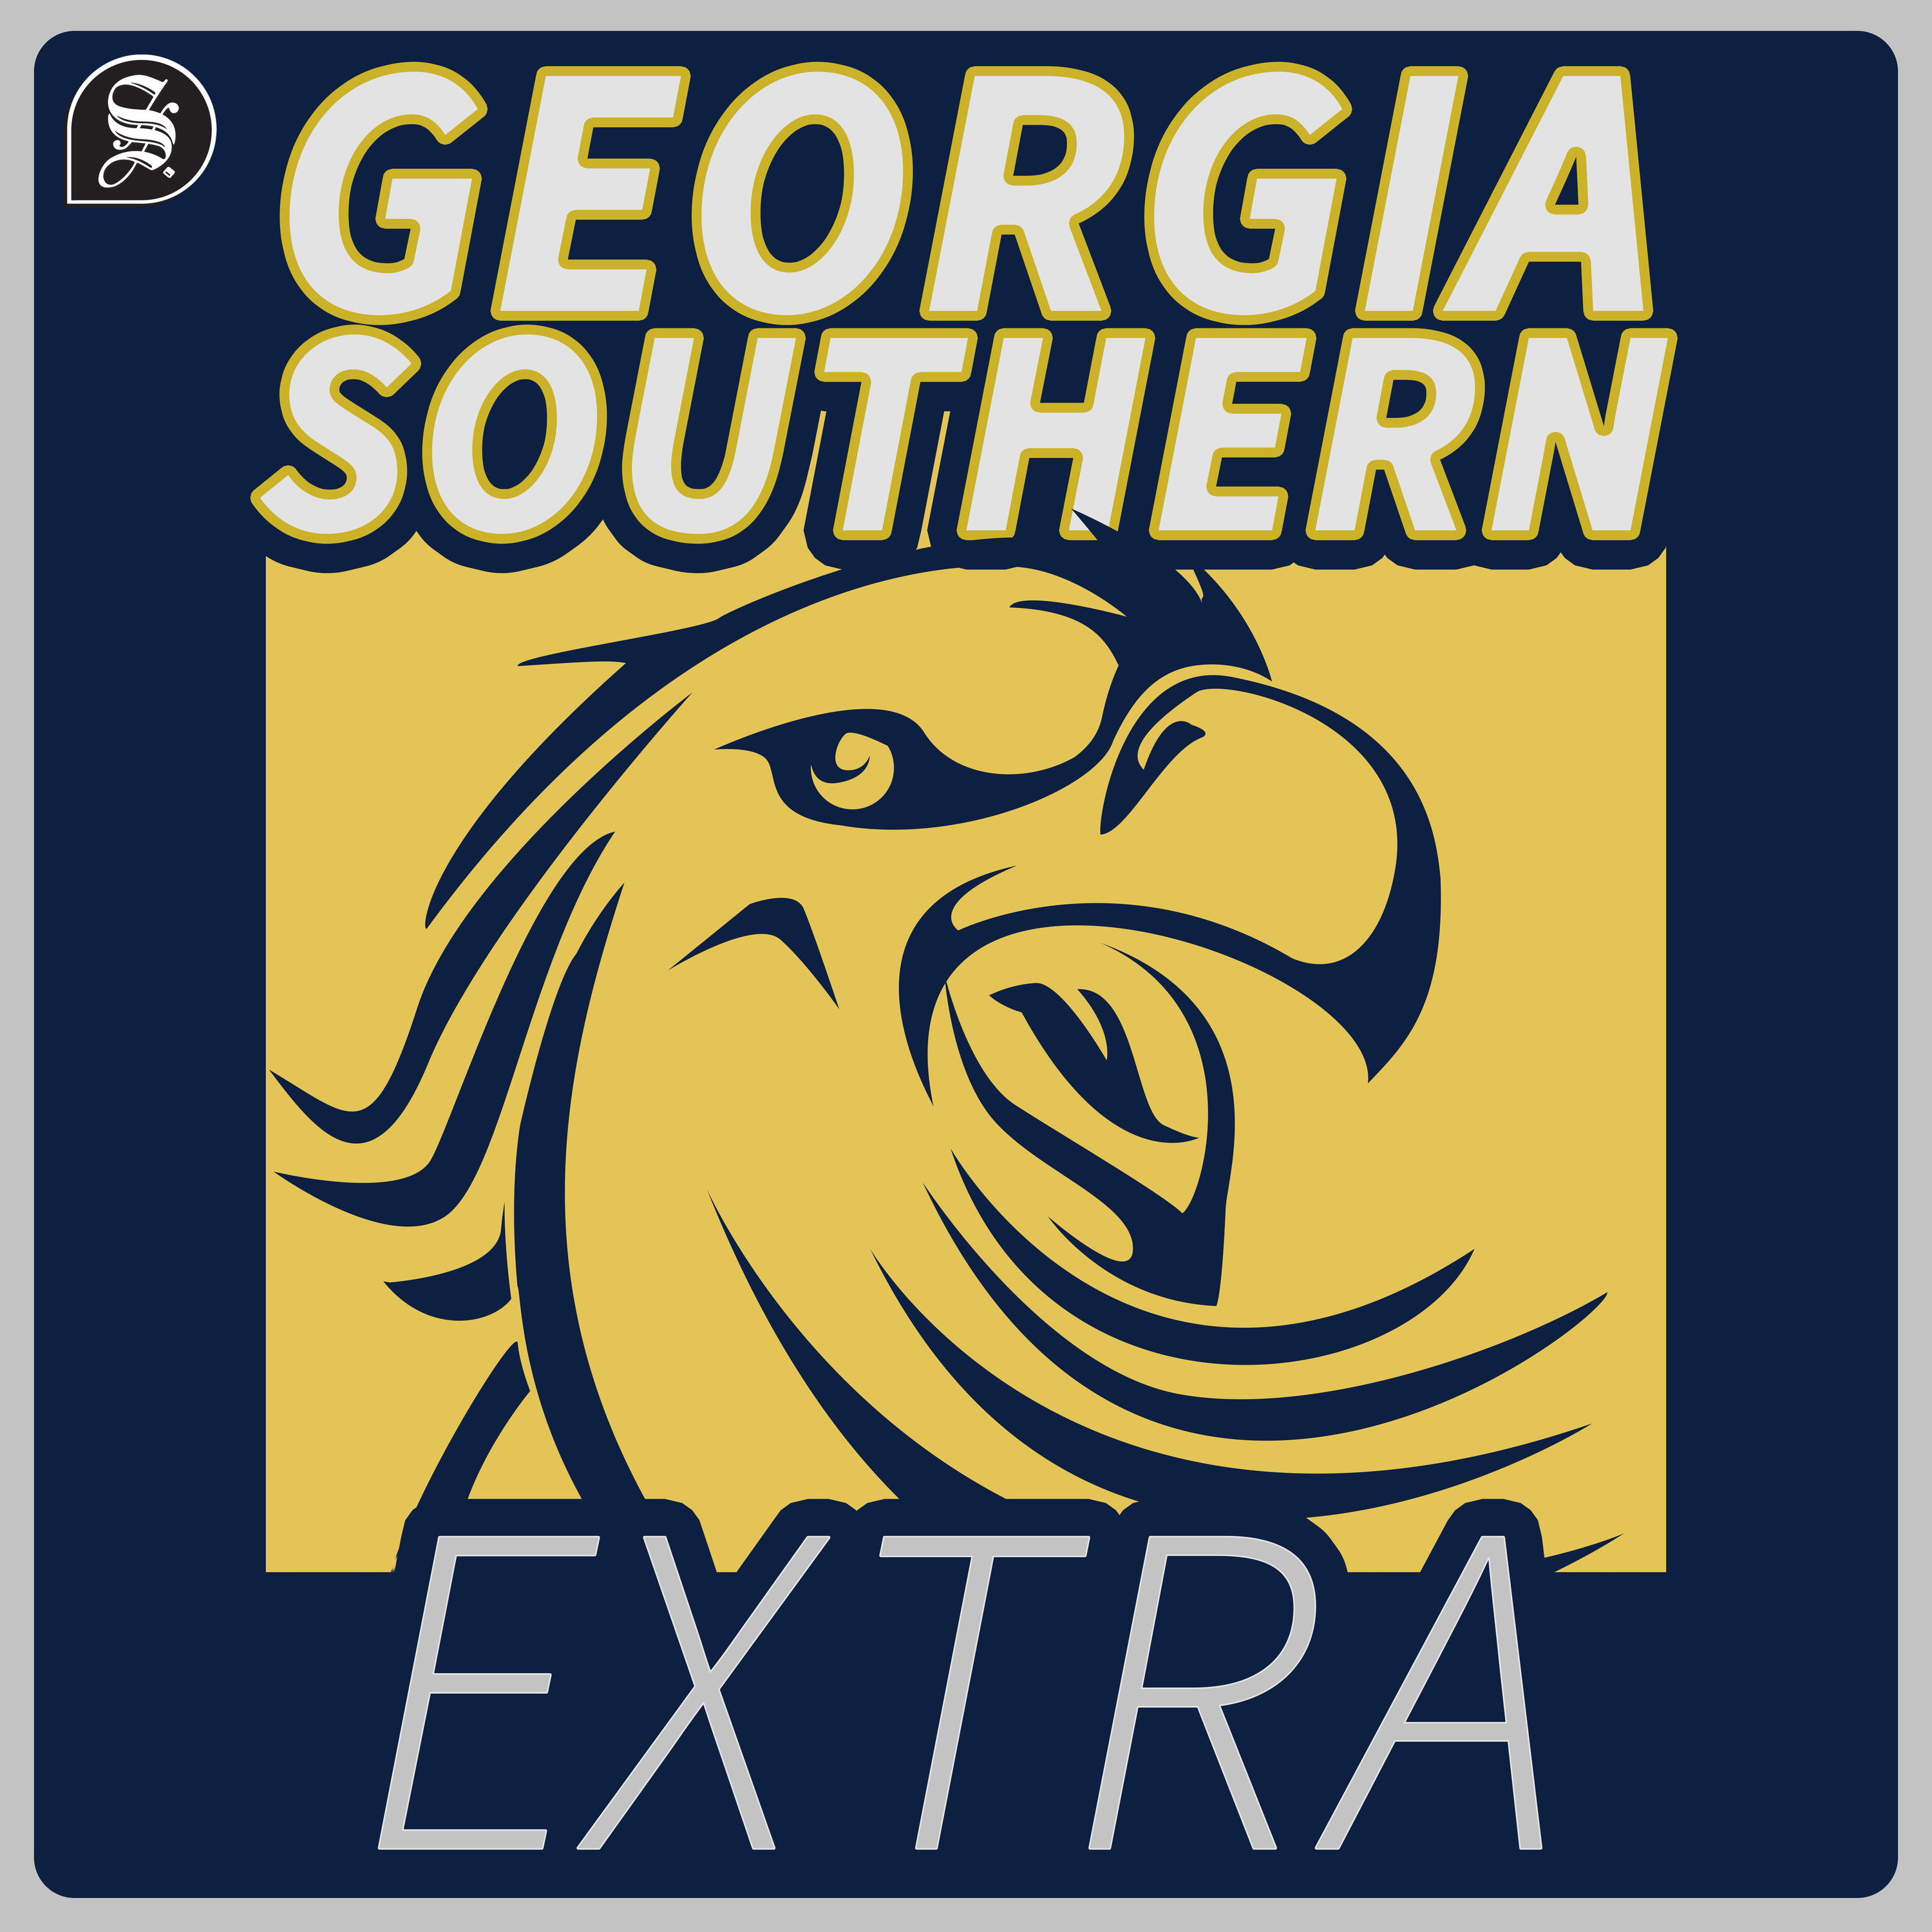 Week 10: Coming out of the bye with an interview with Georgia Southern men's basketball coach Brian Burg